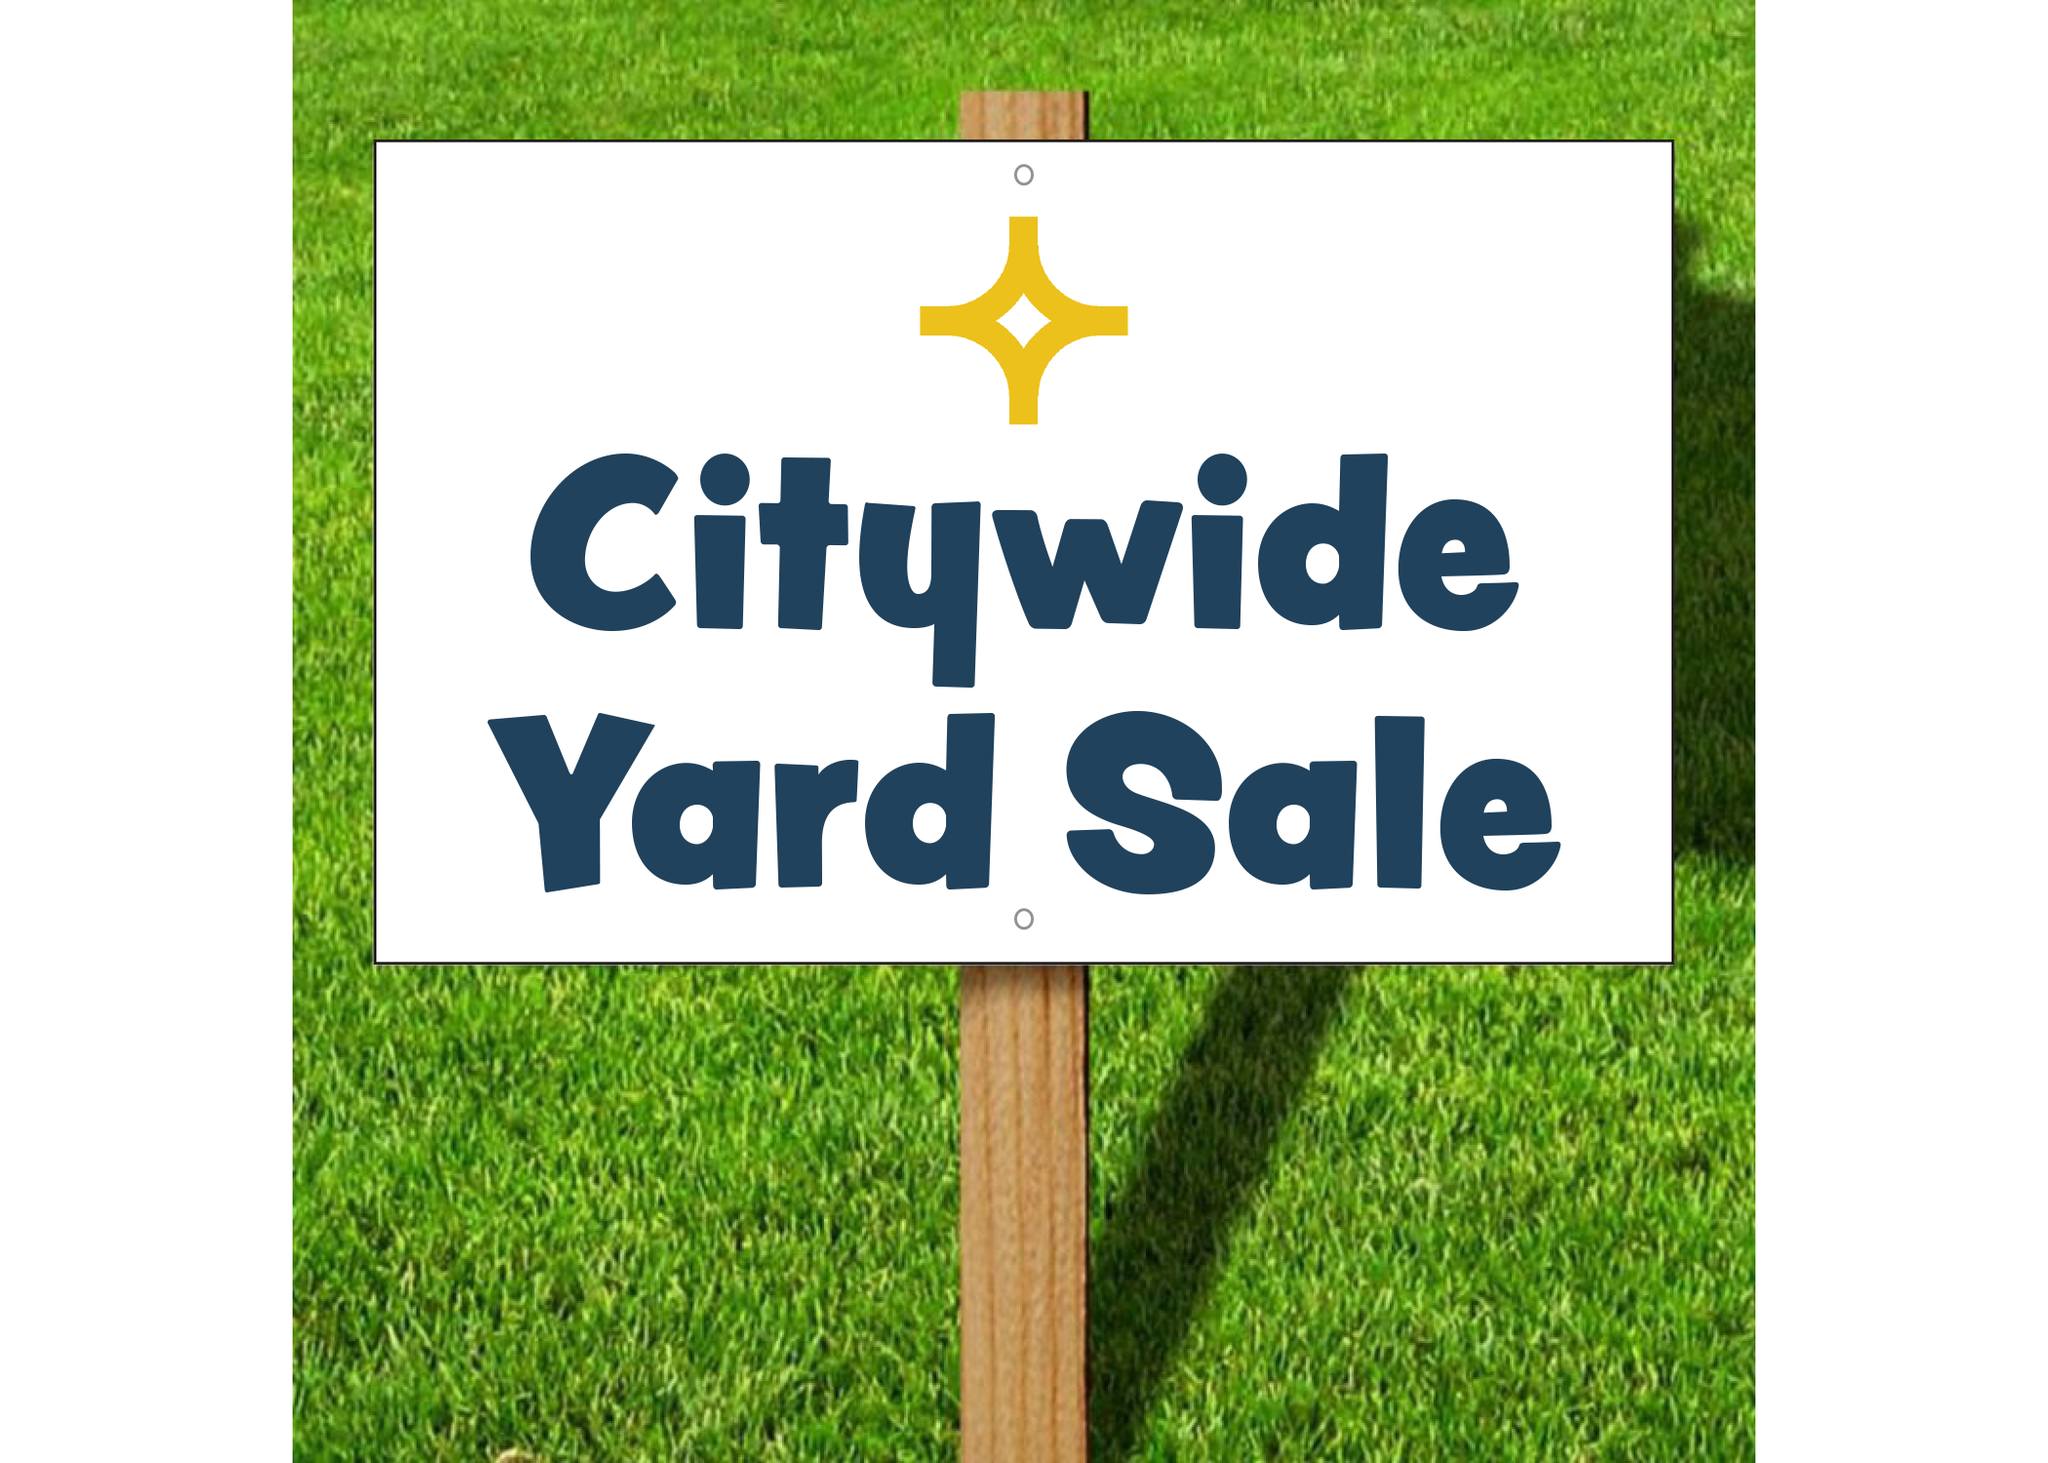 Big Weekend for Yard Sales in West Plains; City Map of Sales Available